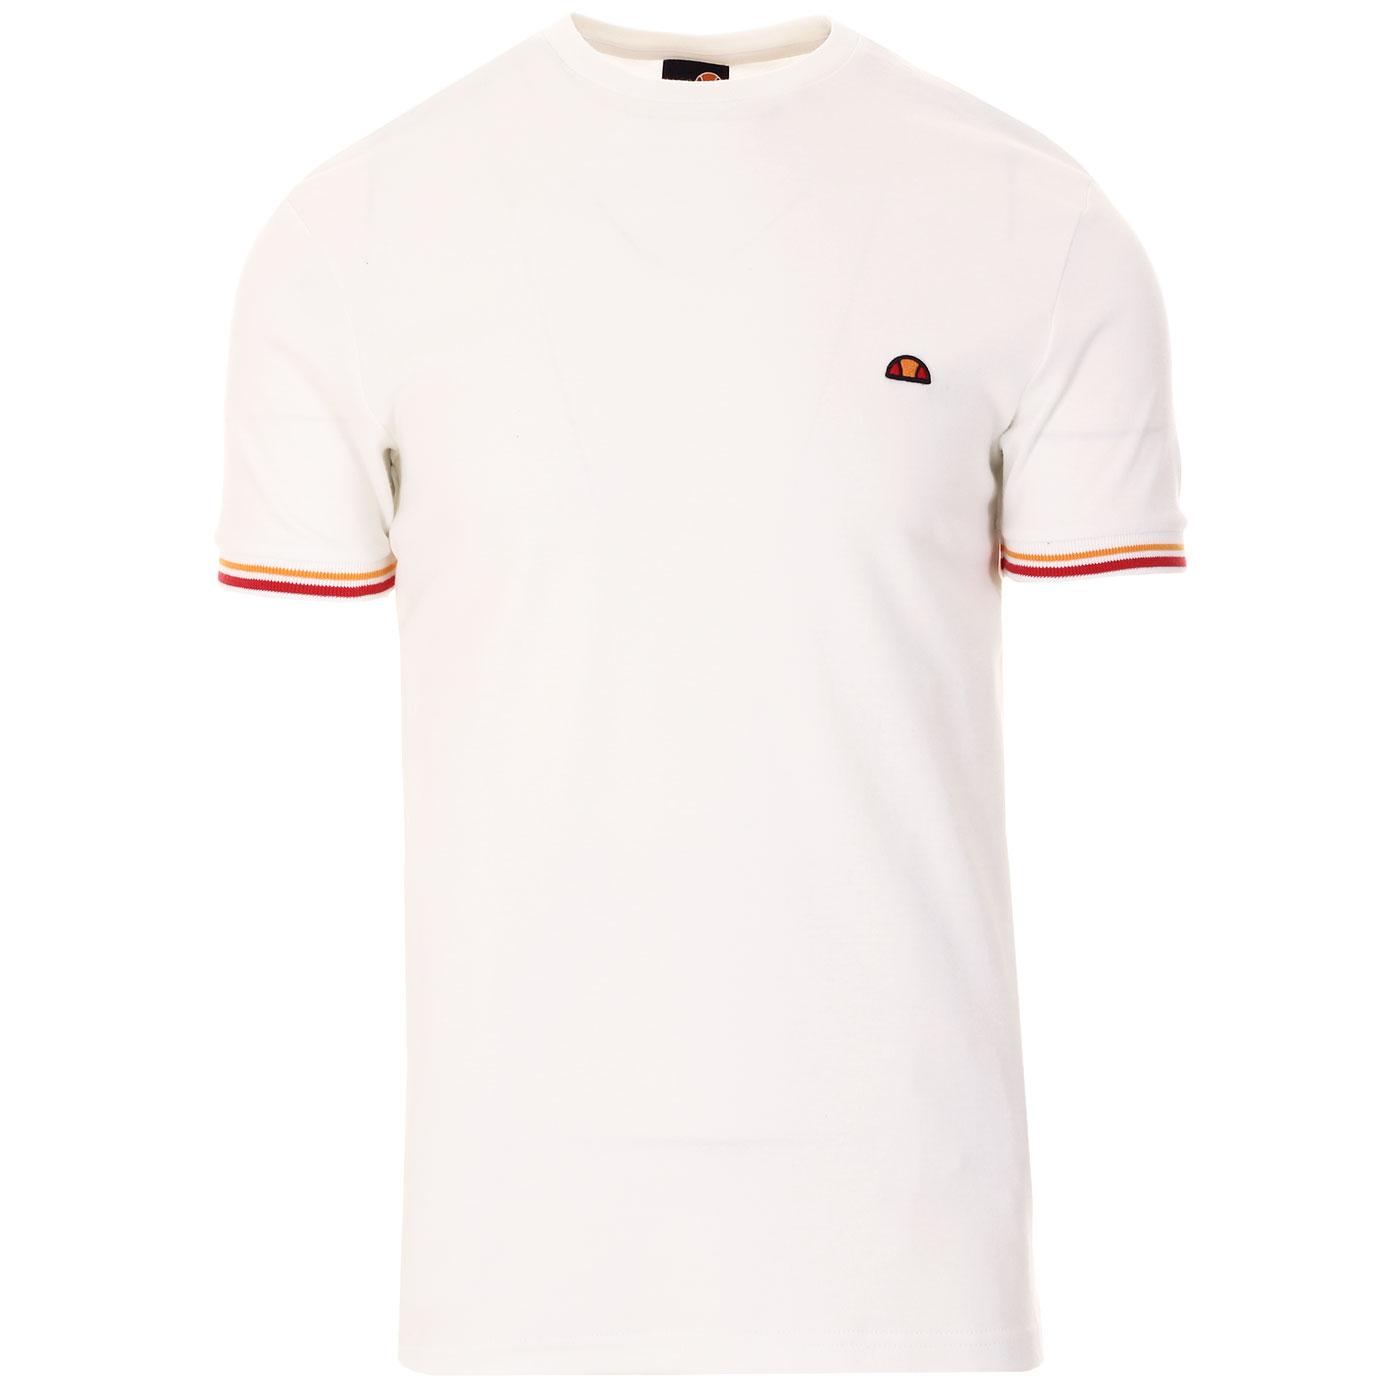 Towers ELLESSE Retro Mod Tipped Cuff Tee (White)